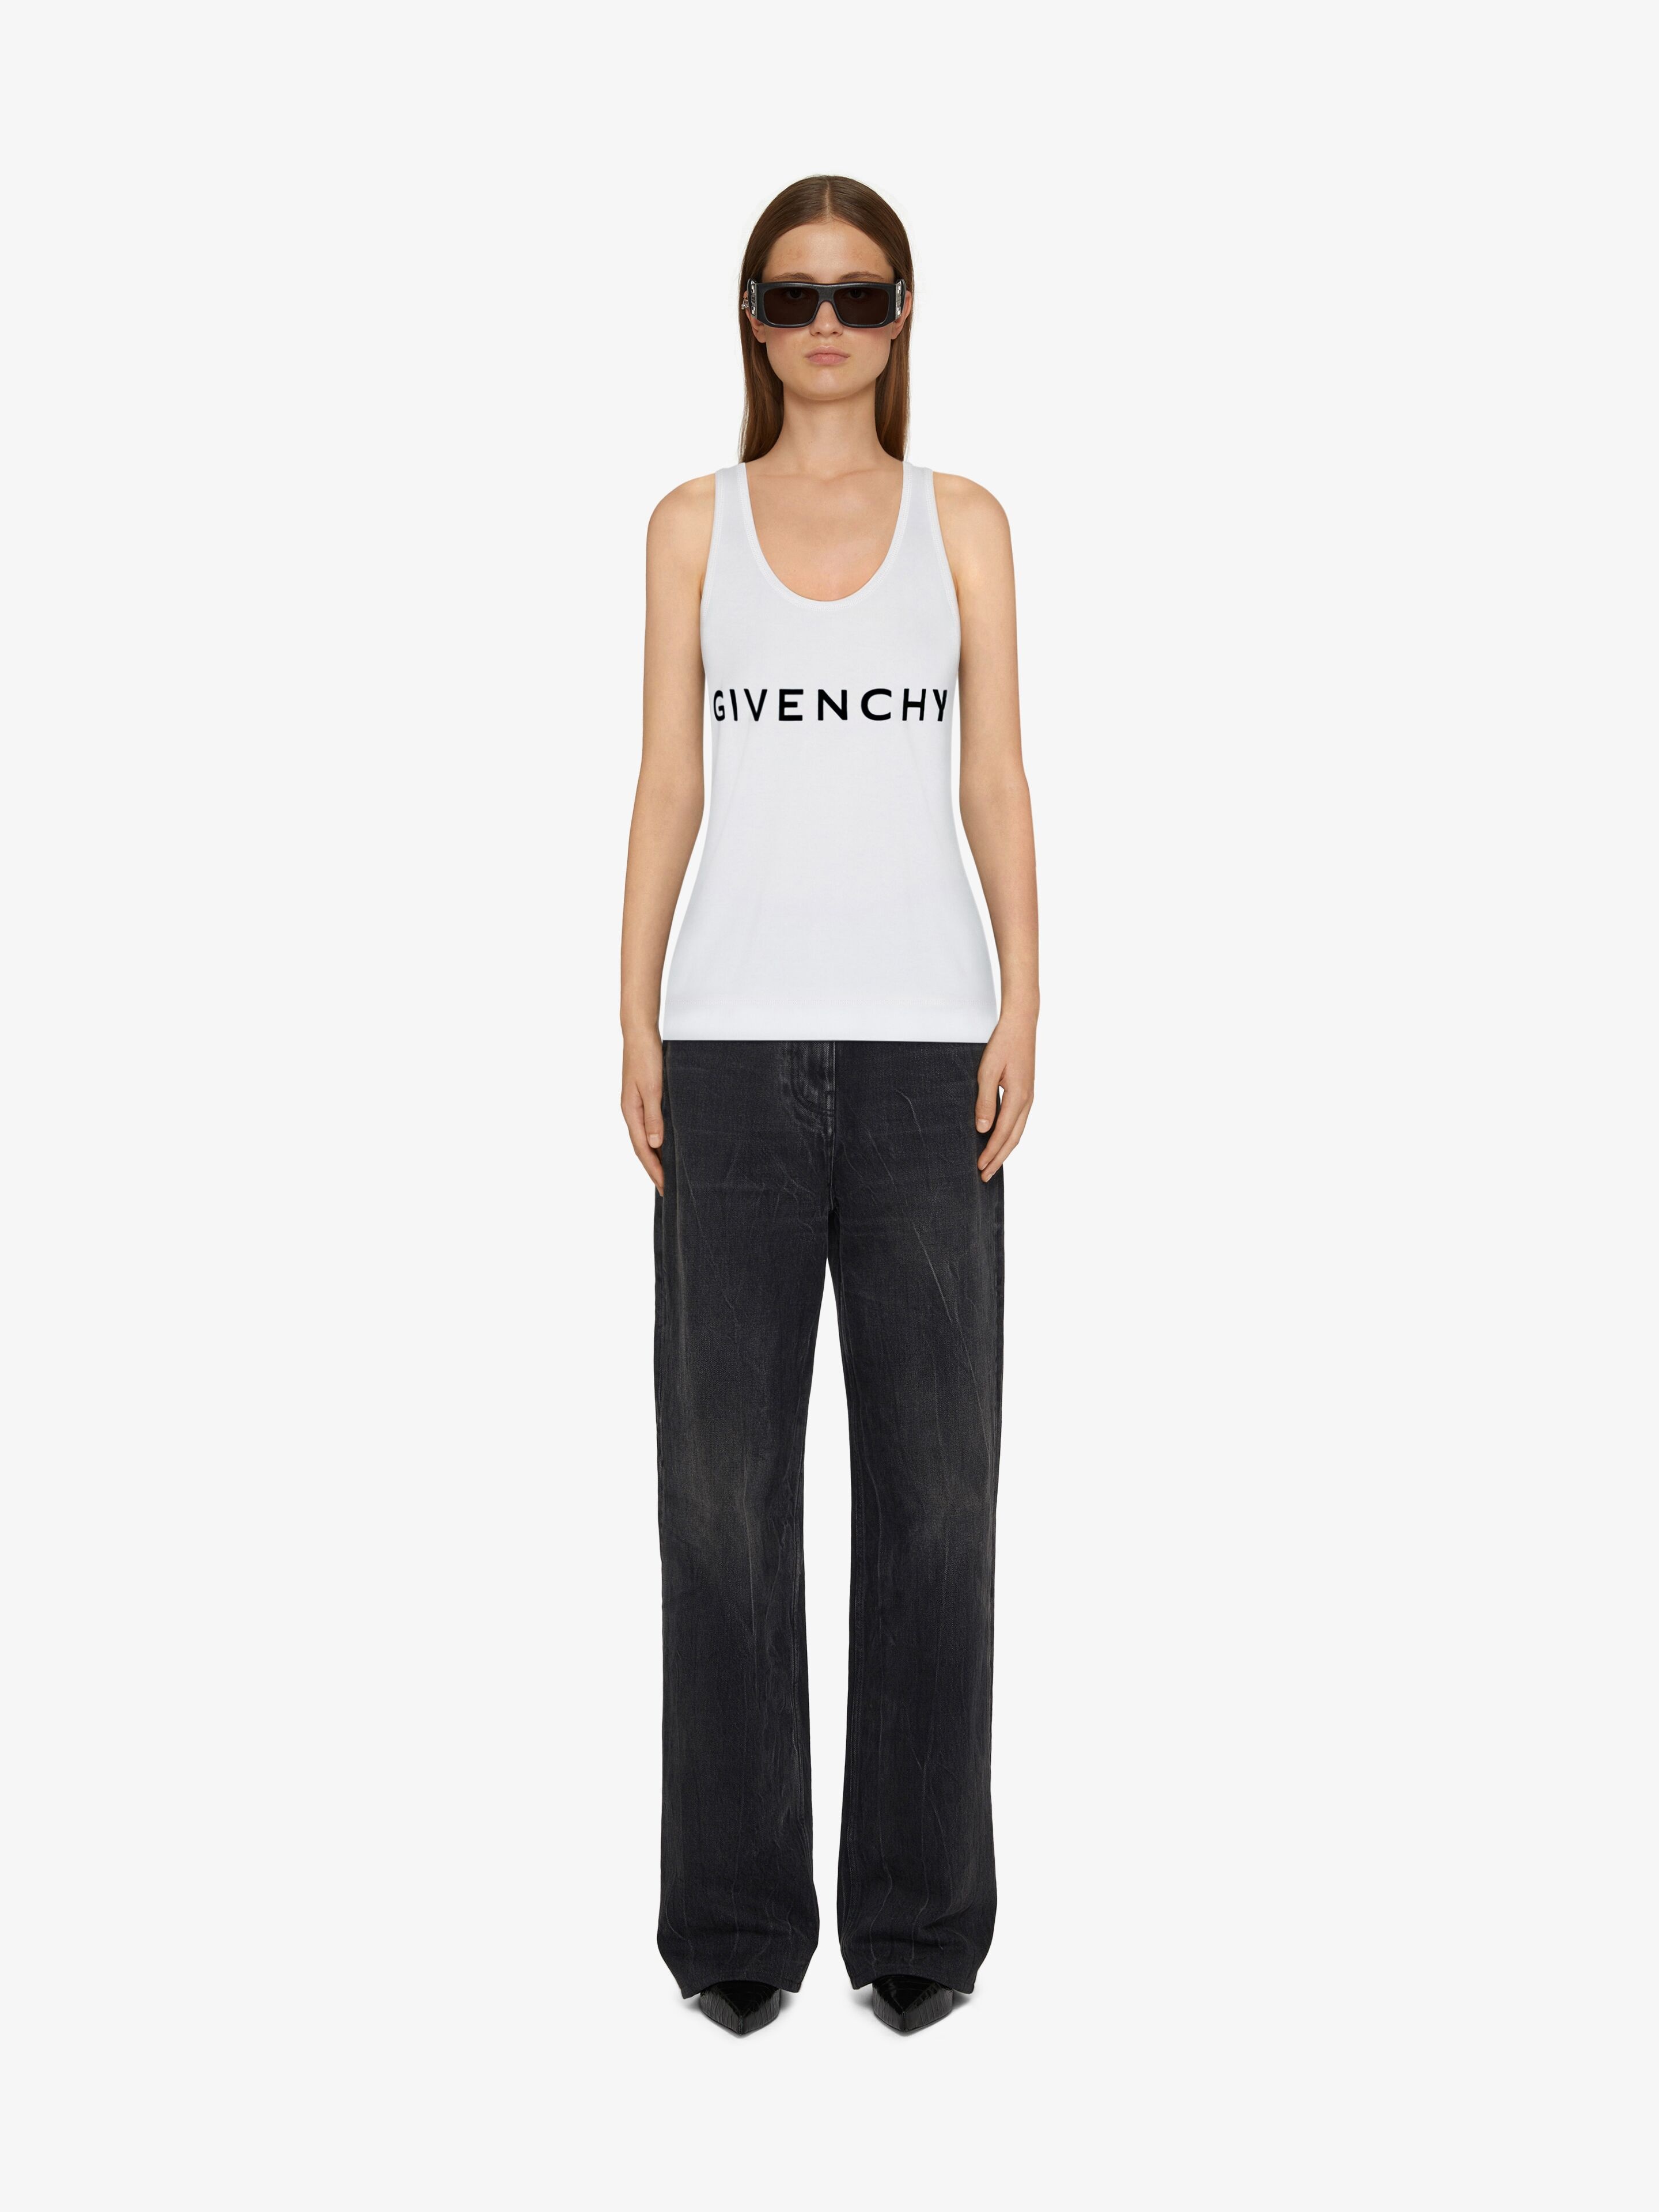 GIVENCHY ARCHETYPE SLIM FIT TANK TOP IN COTTON - 2